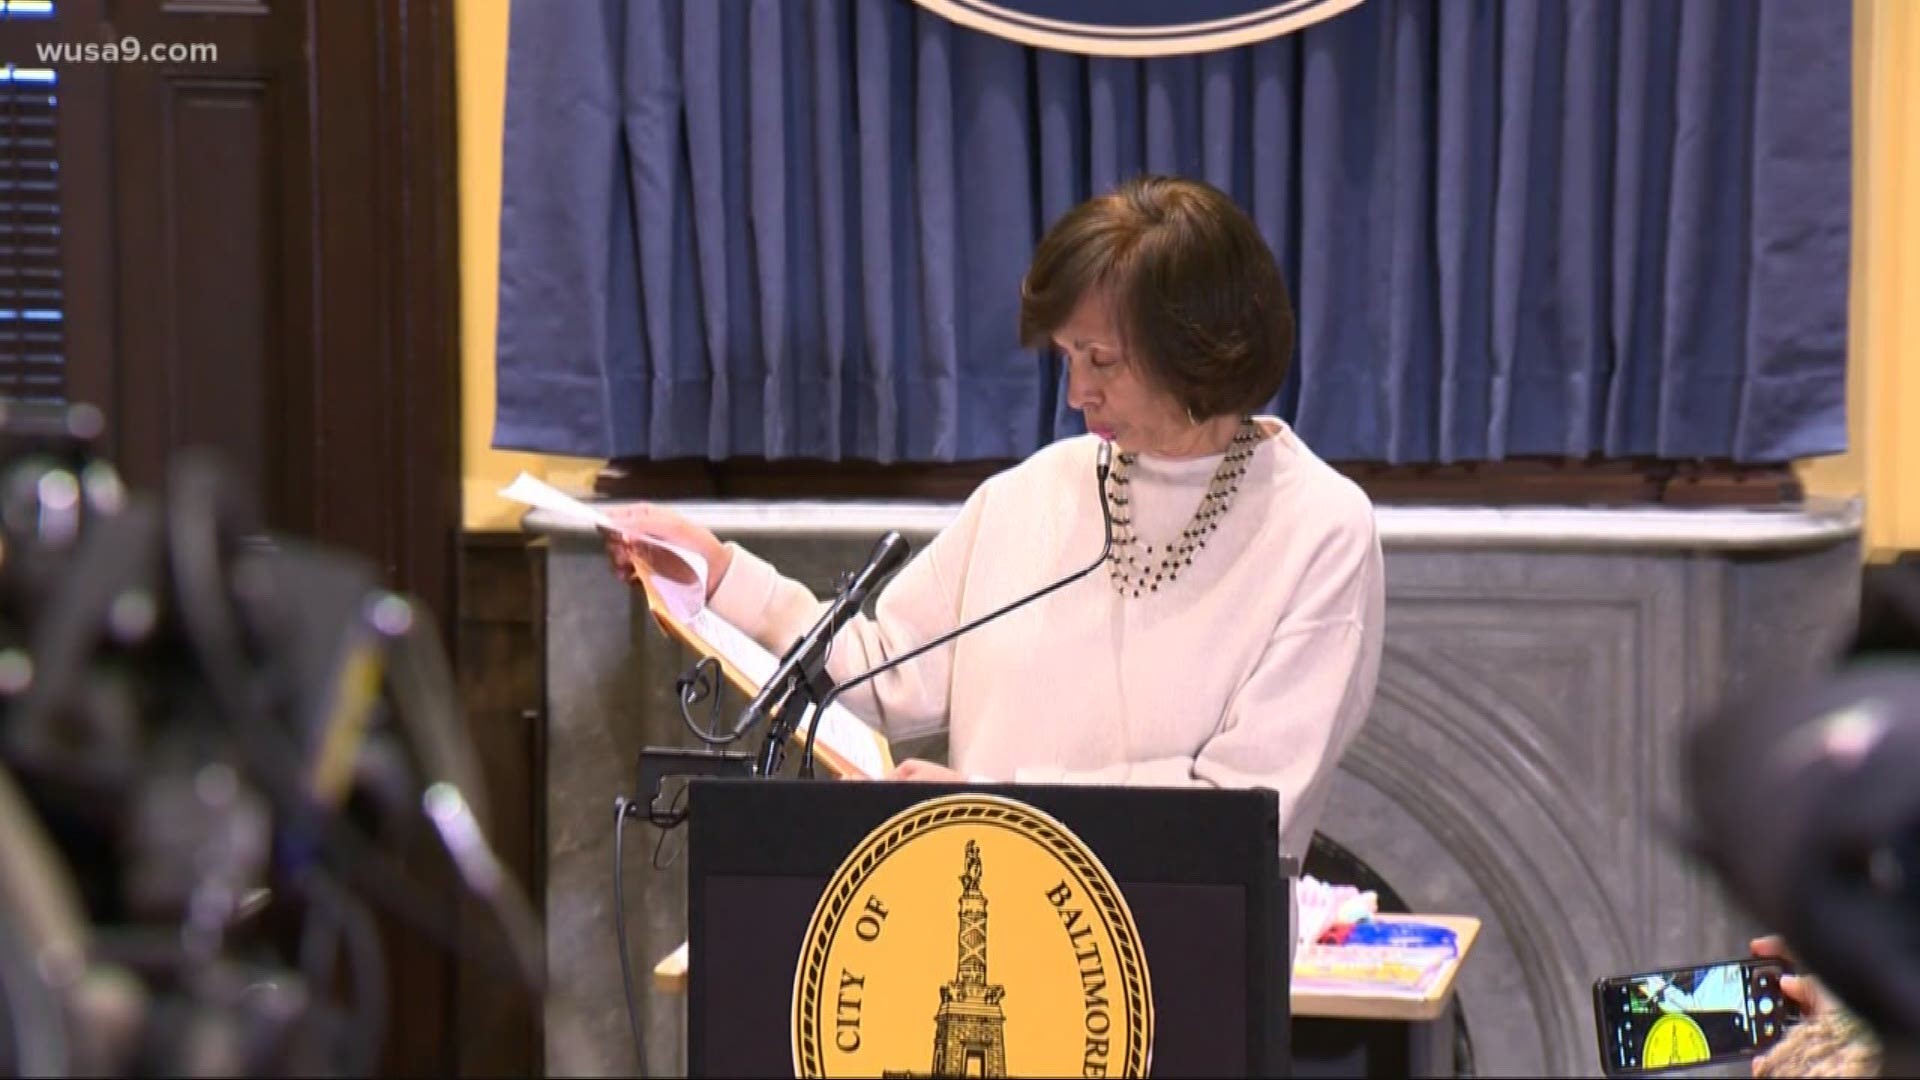 Following the book scandal and the FBI searching her homes and City Hall, many question Pugh's future, but in a news conference Thursday she resigned.